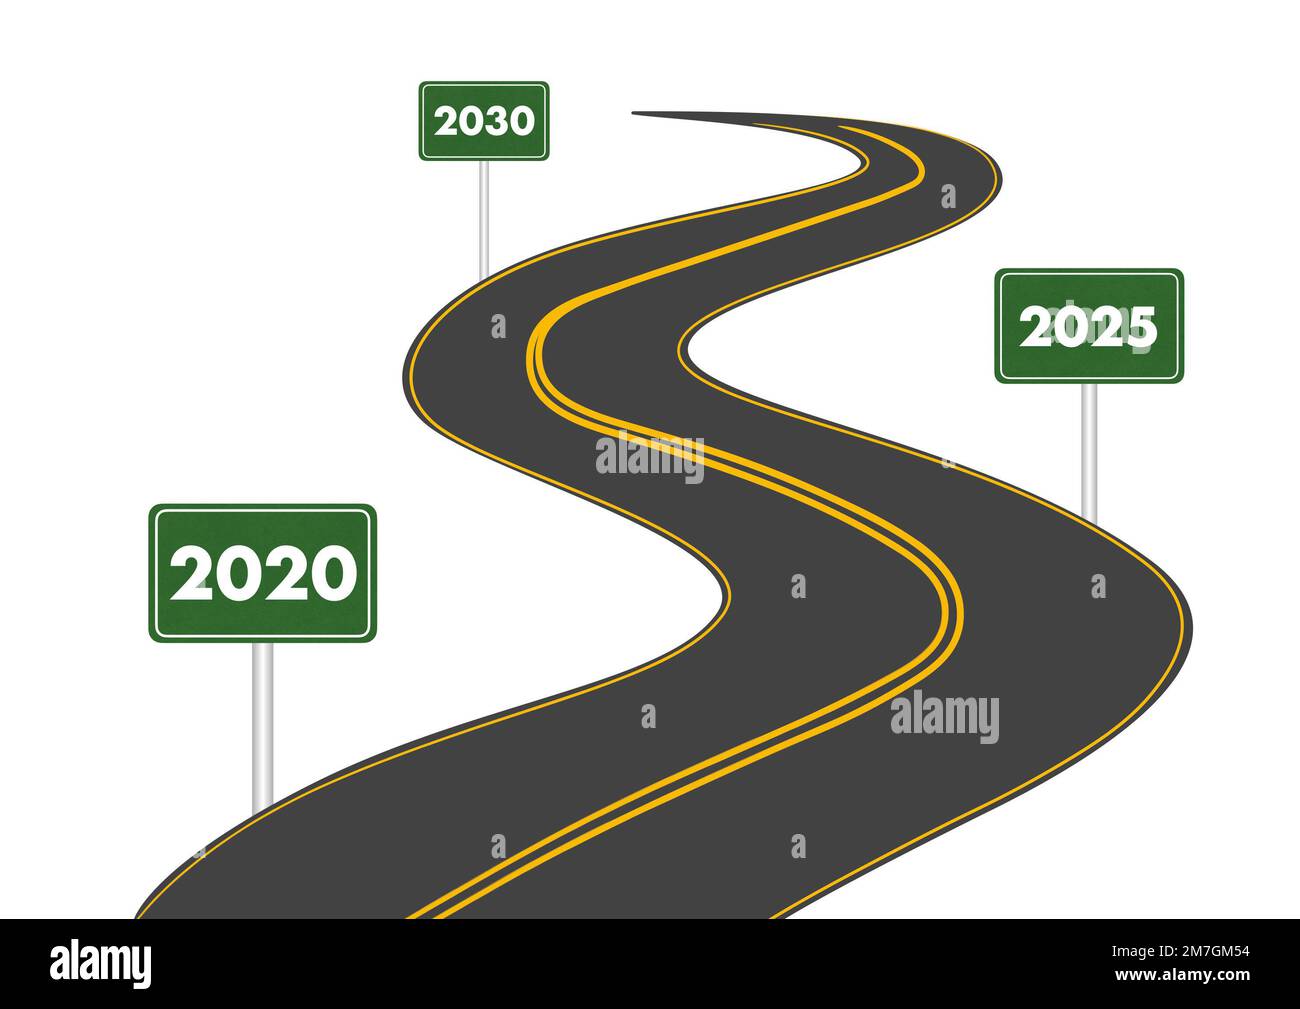 Illustration of roadmap from 2020 to 2025 and 2030 Stock Photo